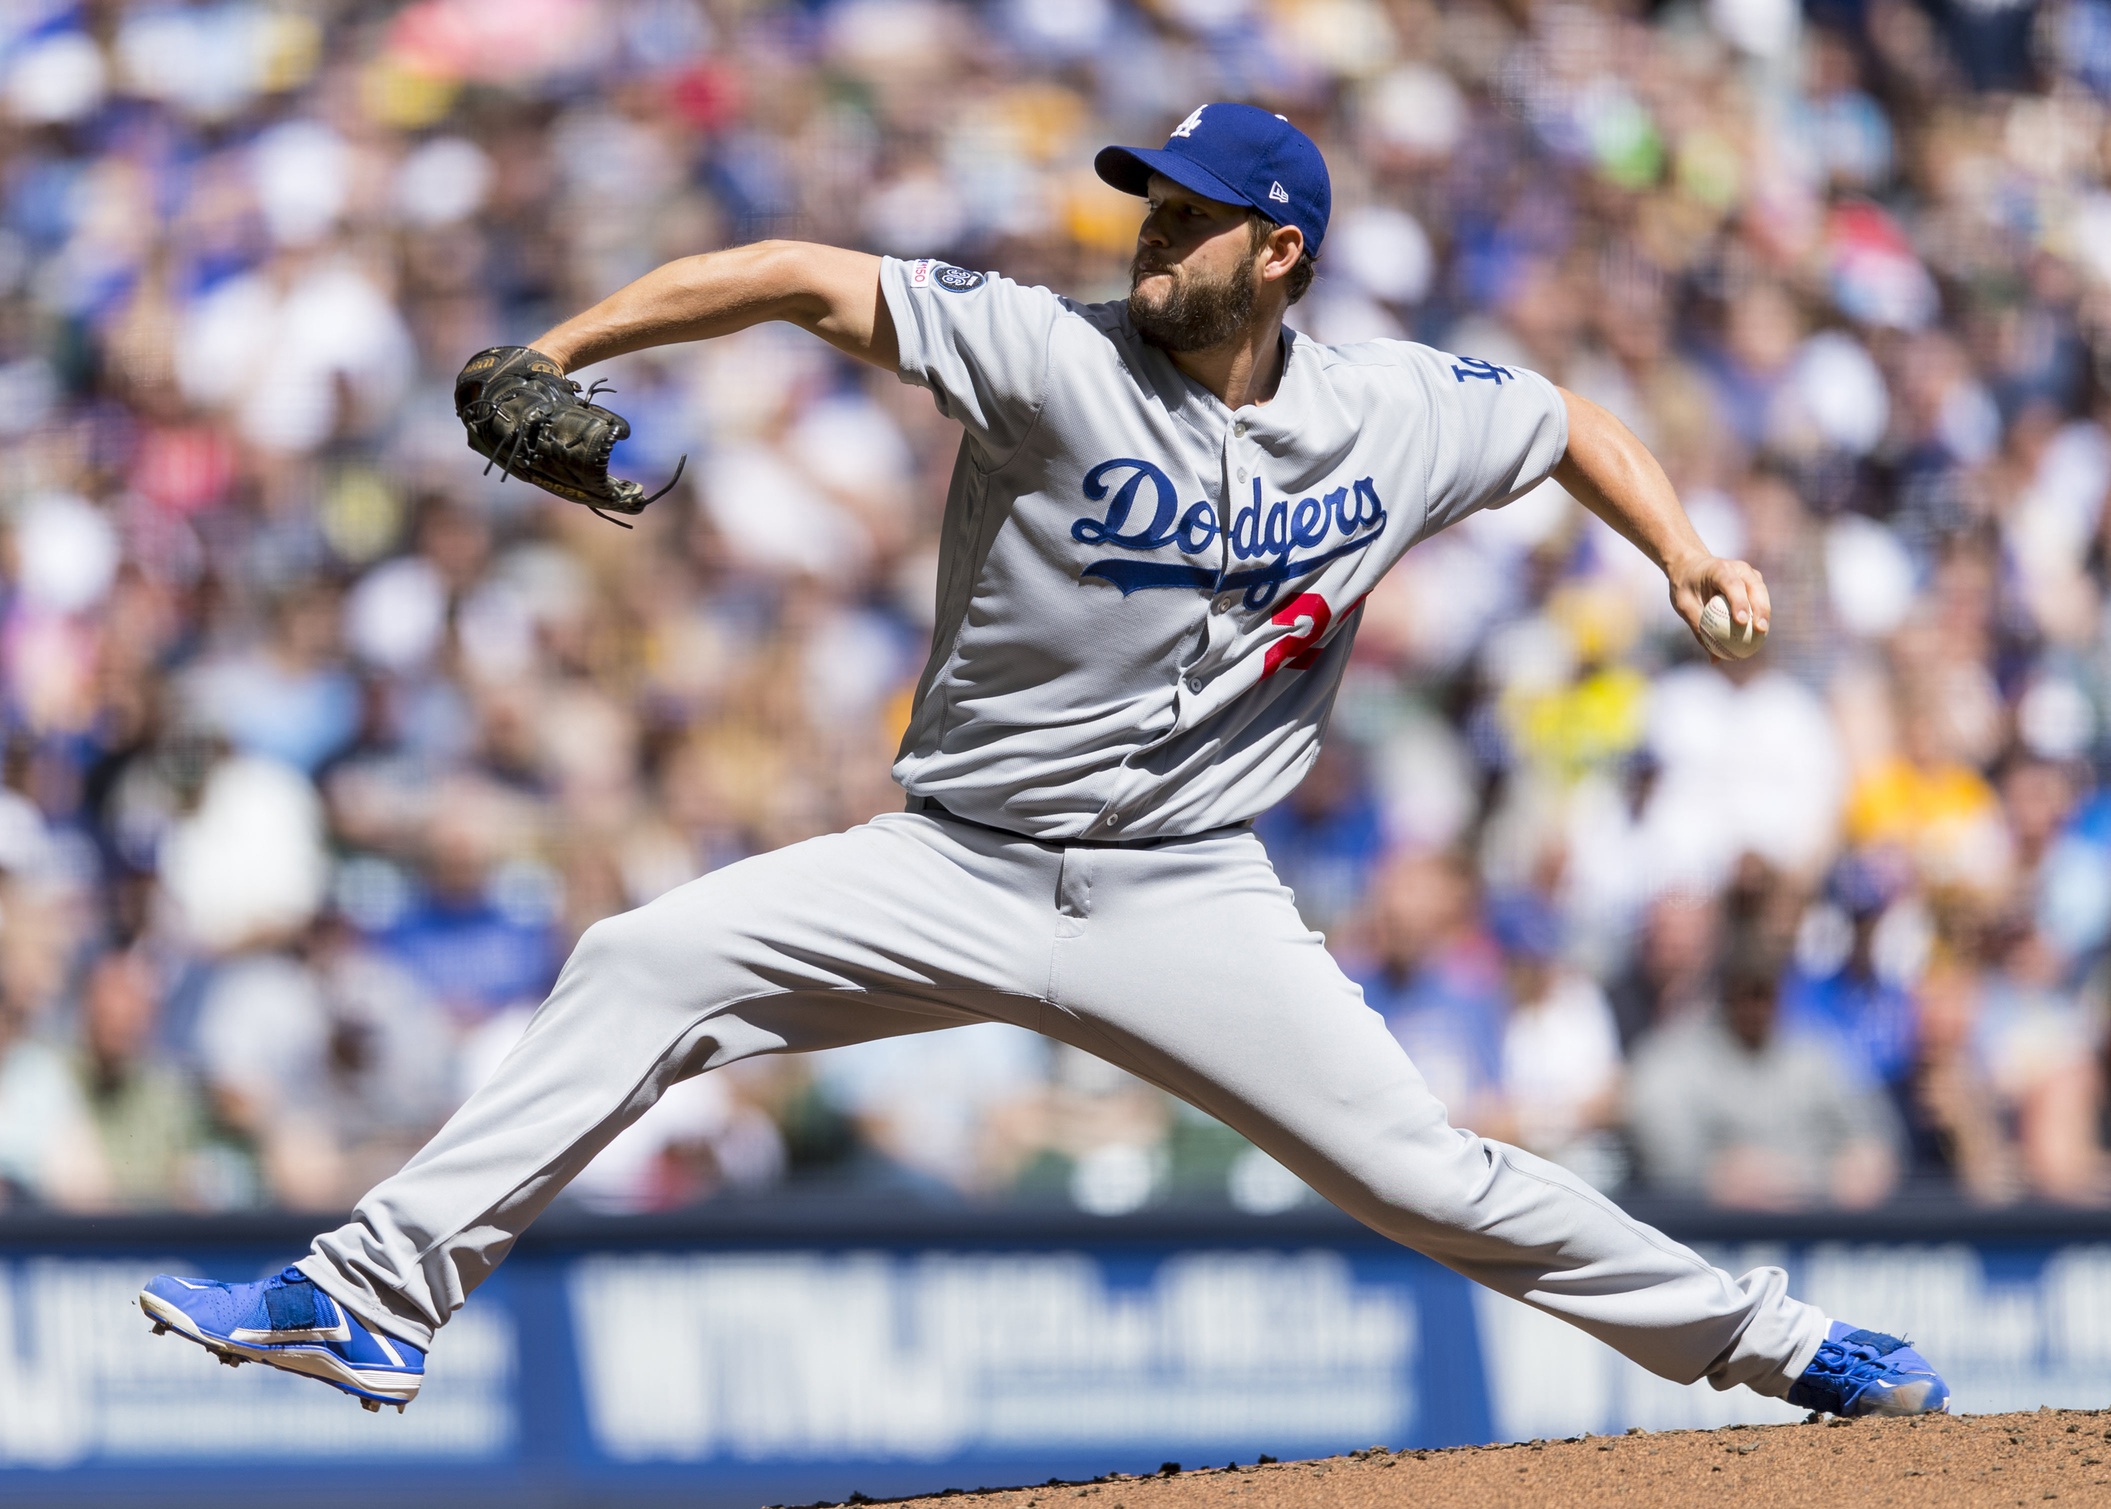 Dodgers Score: Live Game Updates and Odds vs Brewers on Wednesday, Kershaw and Miley in the Morning